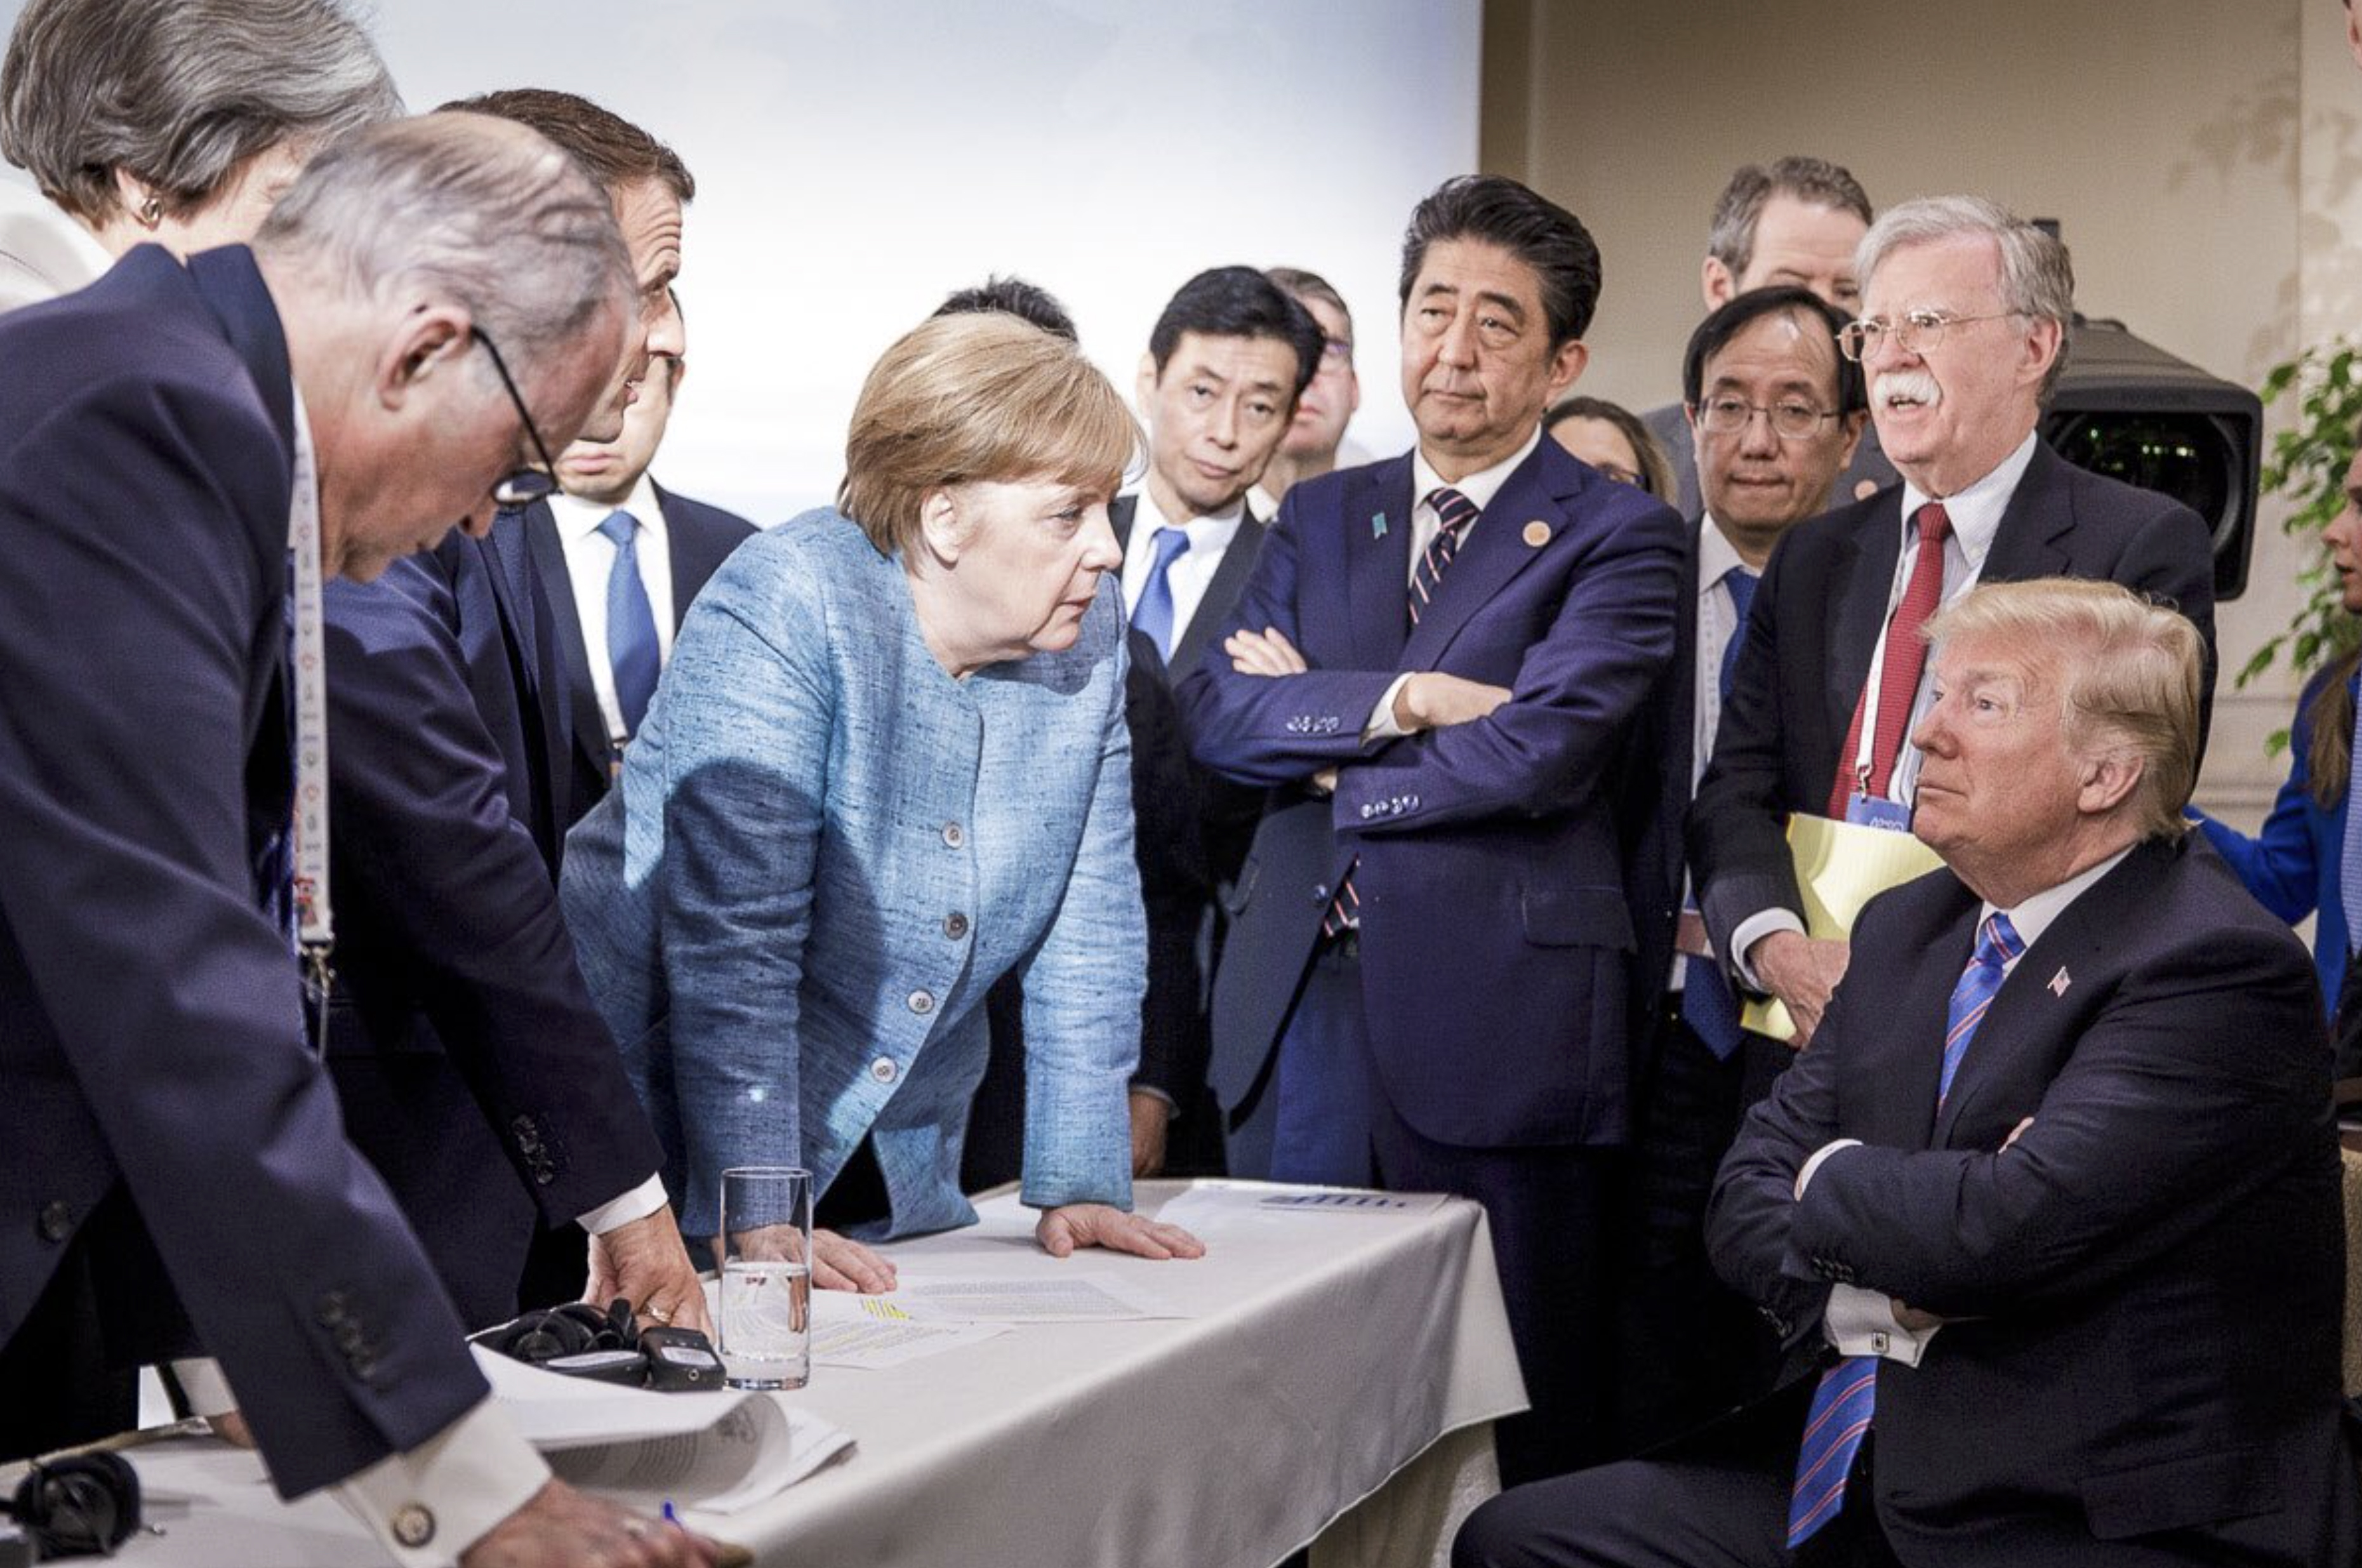 World leaders meet at the G7 summit in Canada